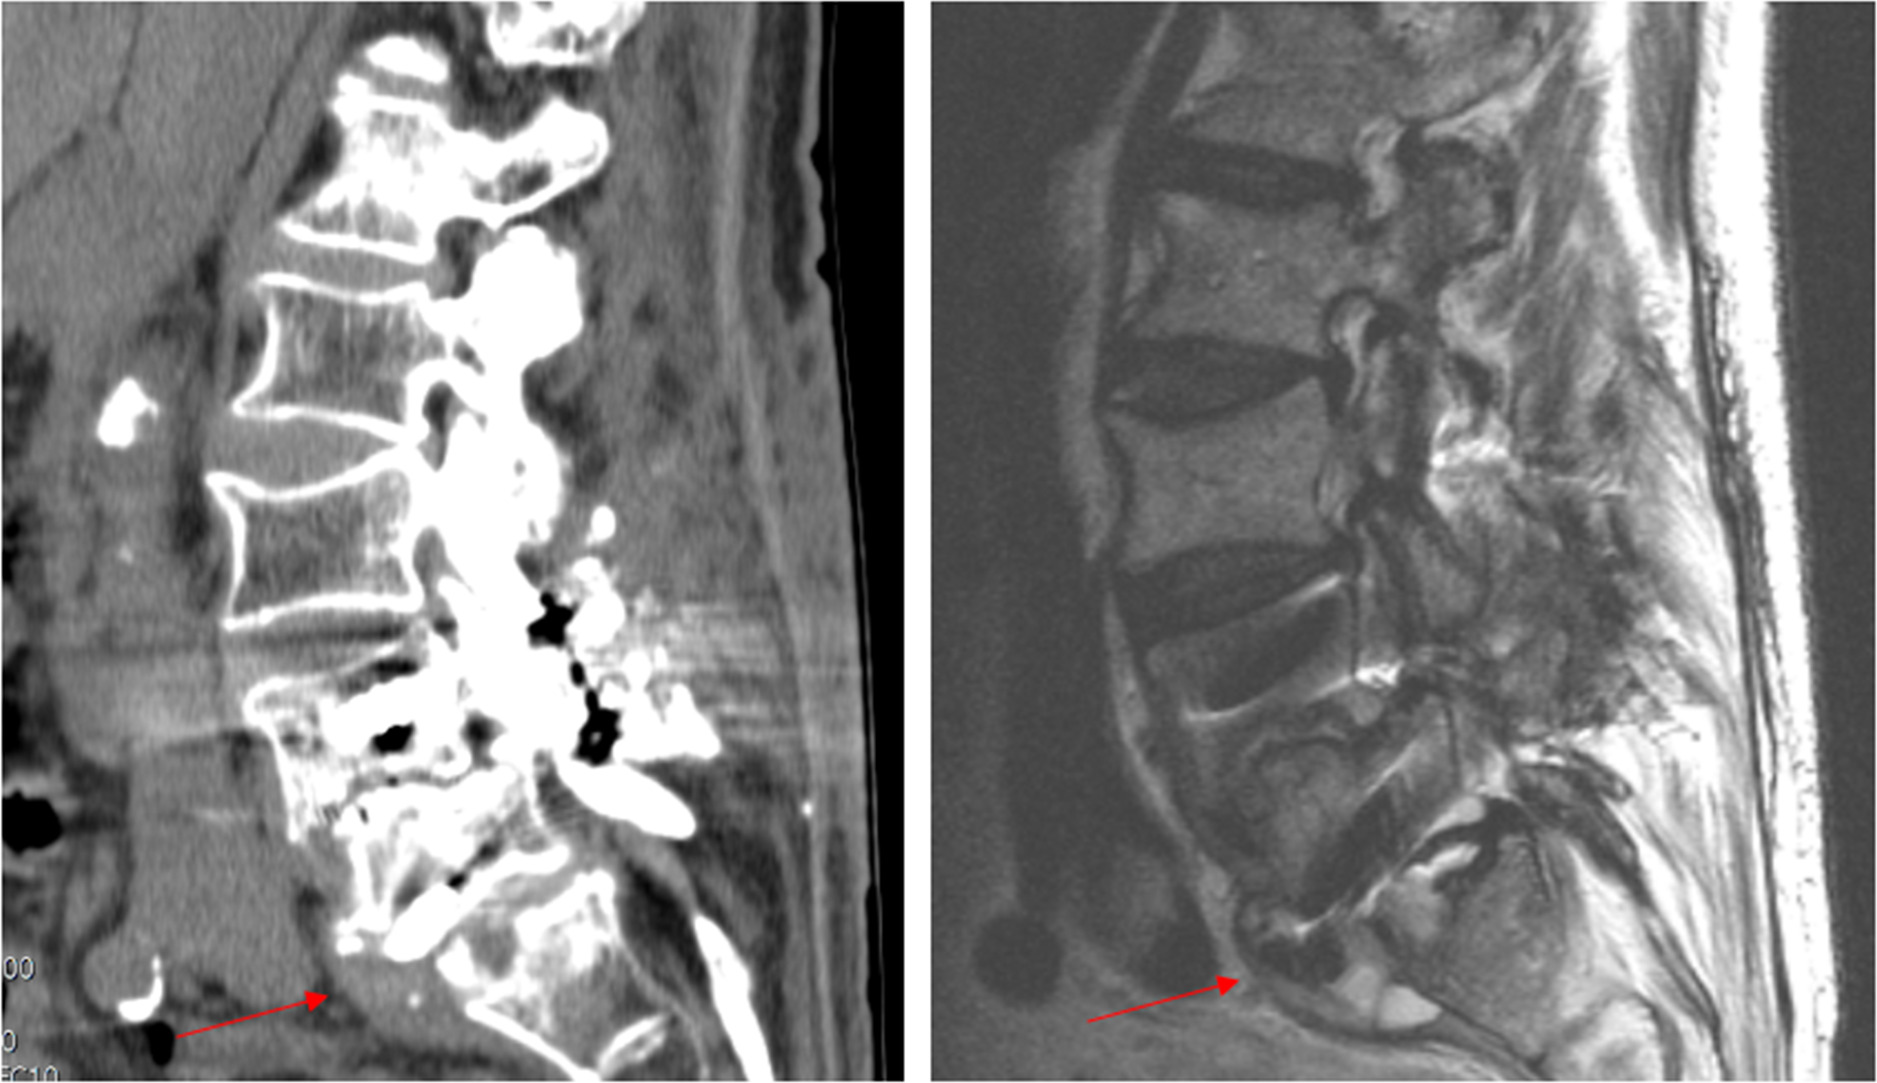 Fig. 2 
          Showcase of difference in visibility of paravertebral manifestations of infection in CT (left) and MRI (right). The patient was a 68-year-old female with implant-related spondylodiscitis L5/S1 and anterior abscess formation as indicated by the red arrow.
        